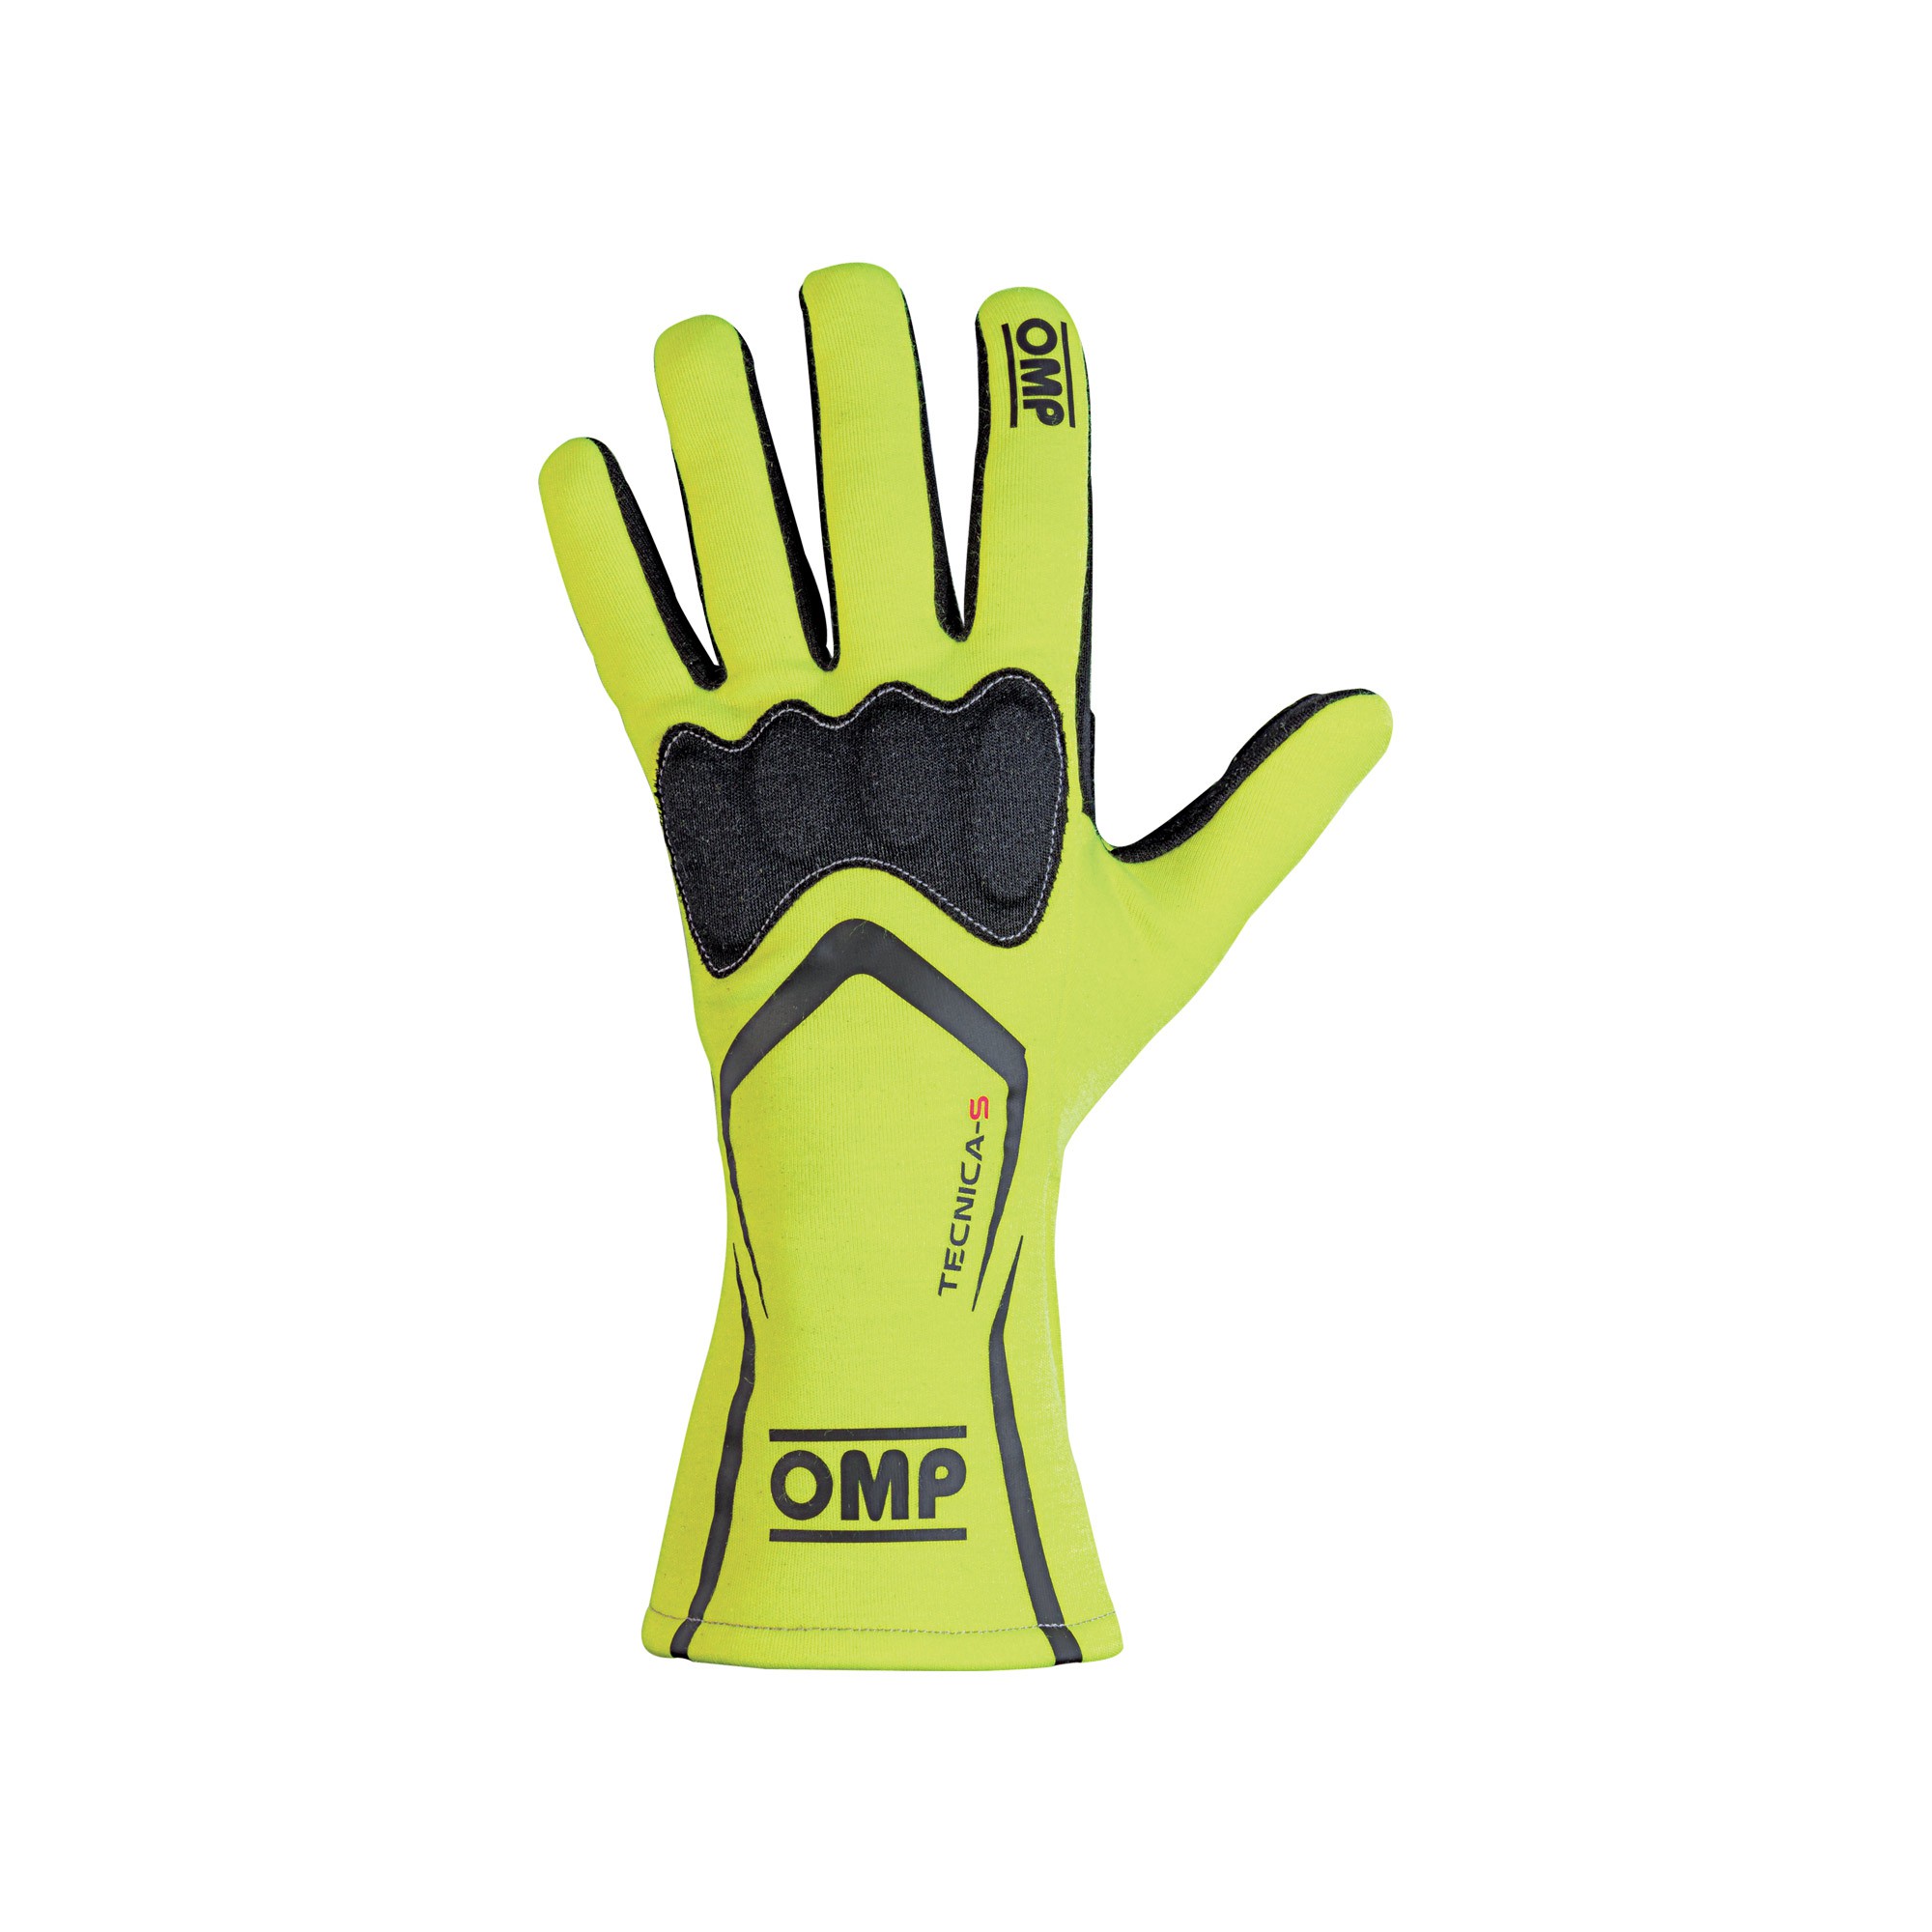 TECNICA-S GLOVES FLUO YELLOW SIZE L